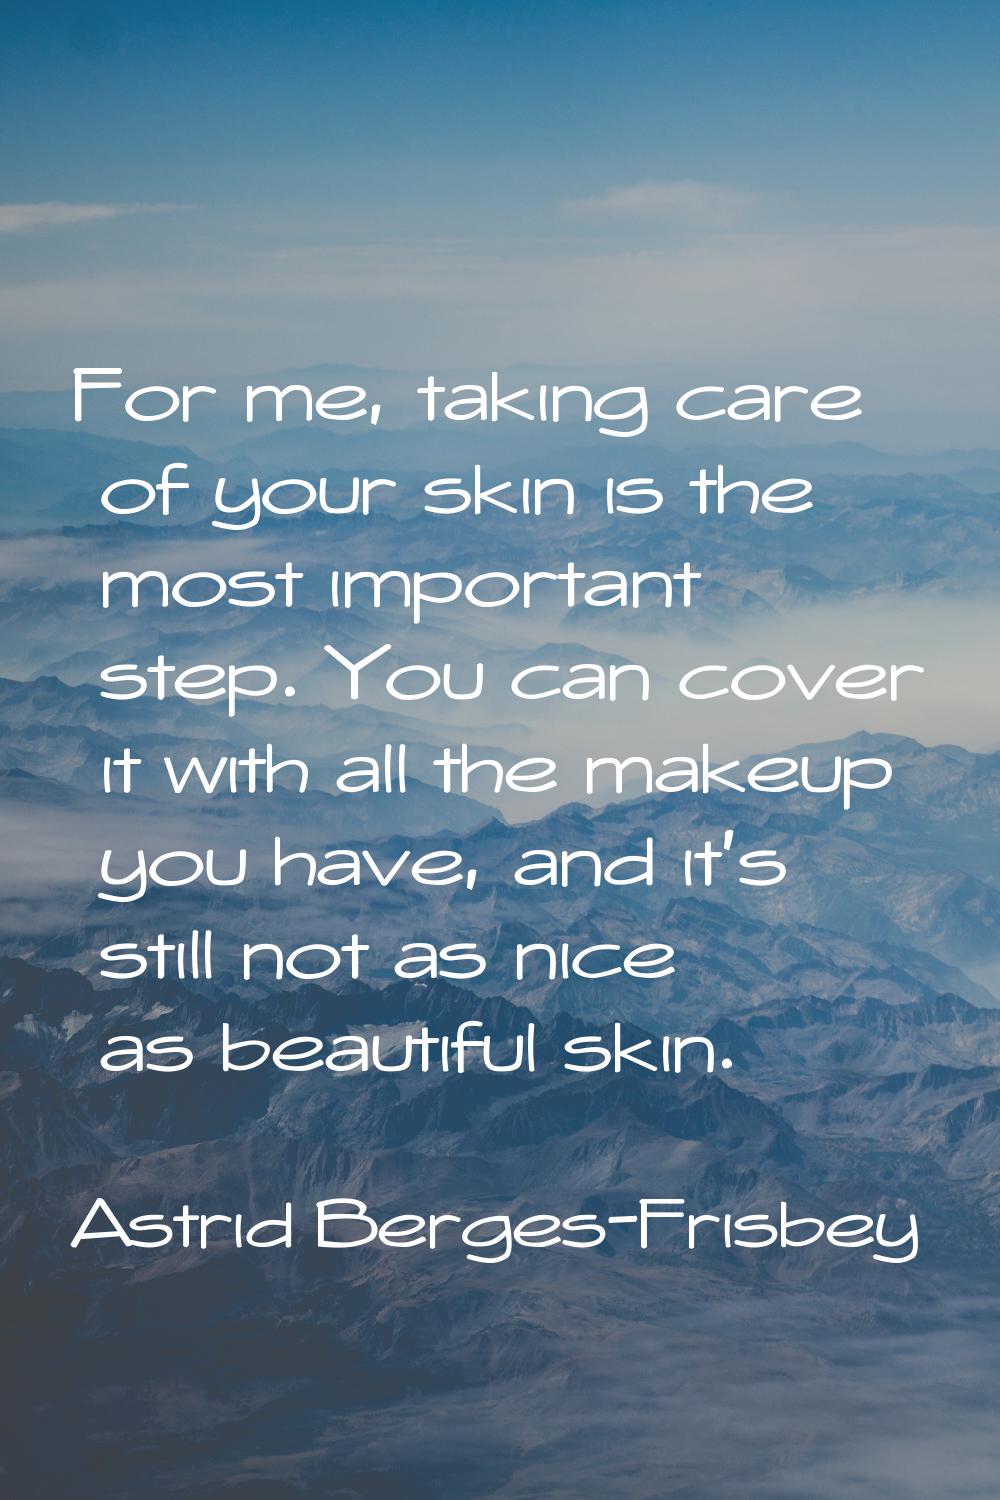 For me, taking care of your skin is the most important step. You can cover it with all the makeup y